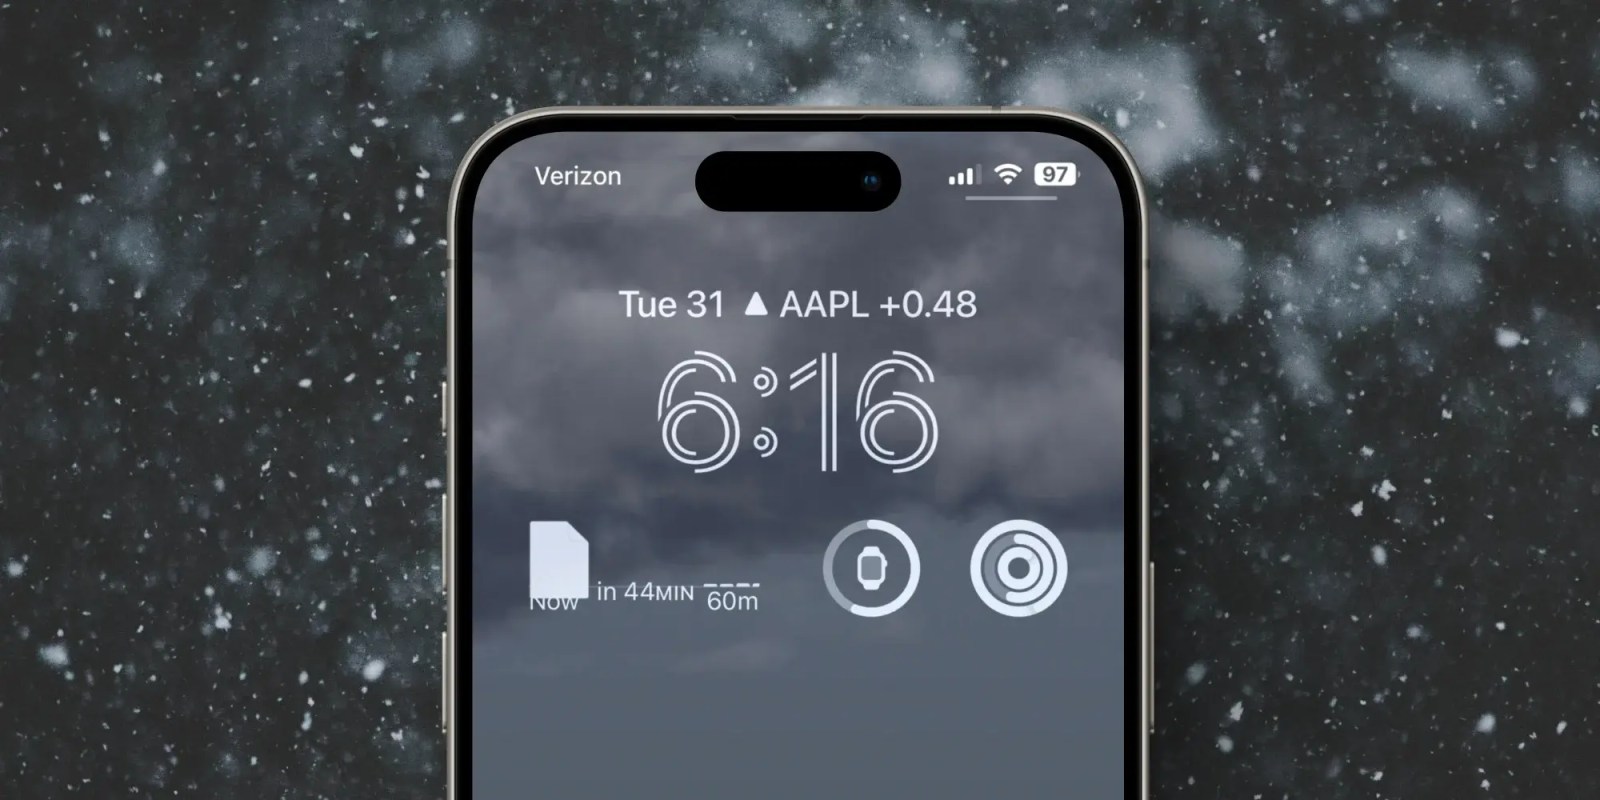 It's not just you: Apple Weather app widget is showing a file icon instead of snow